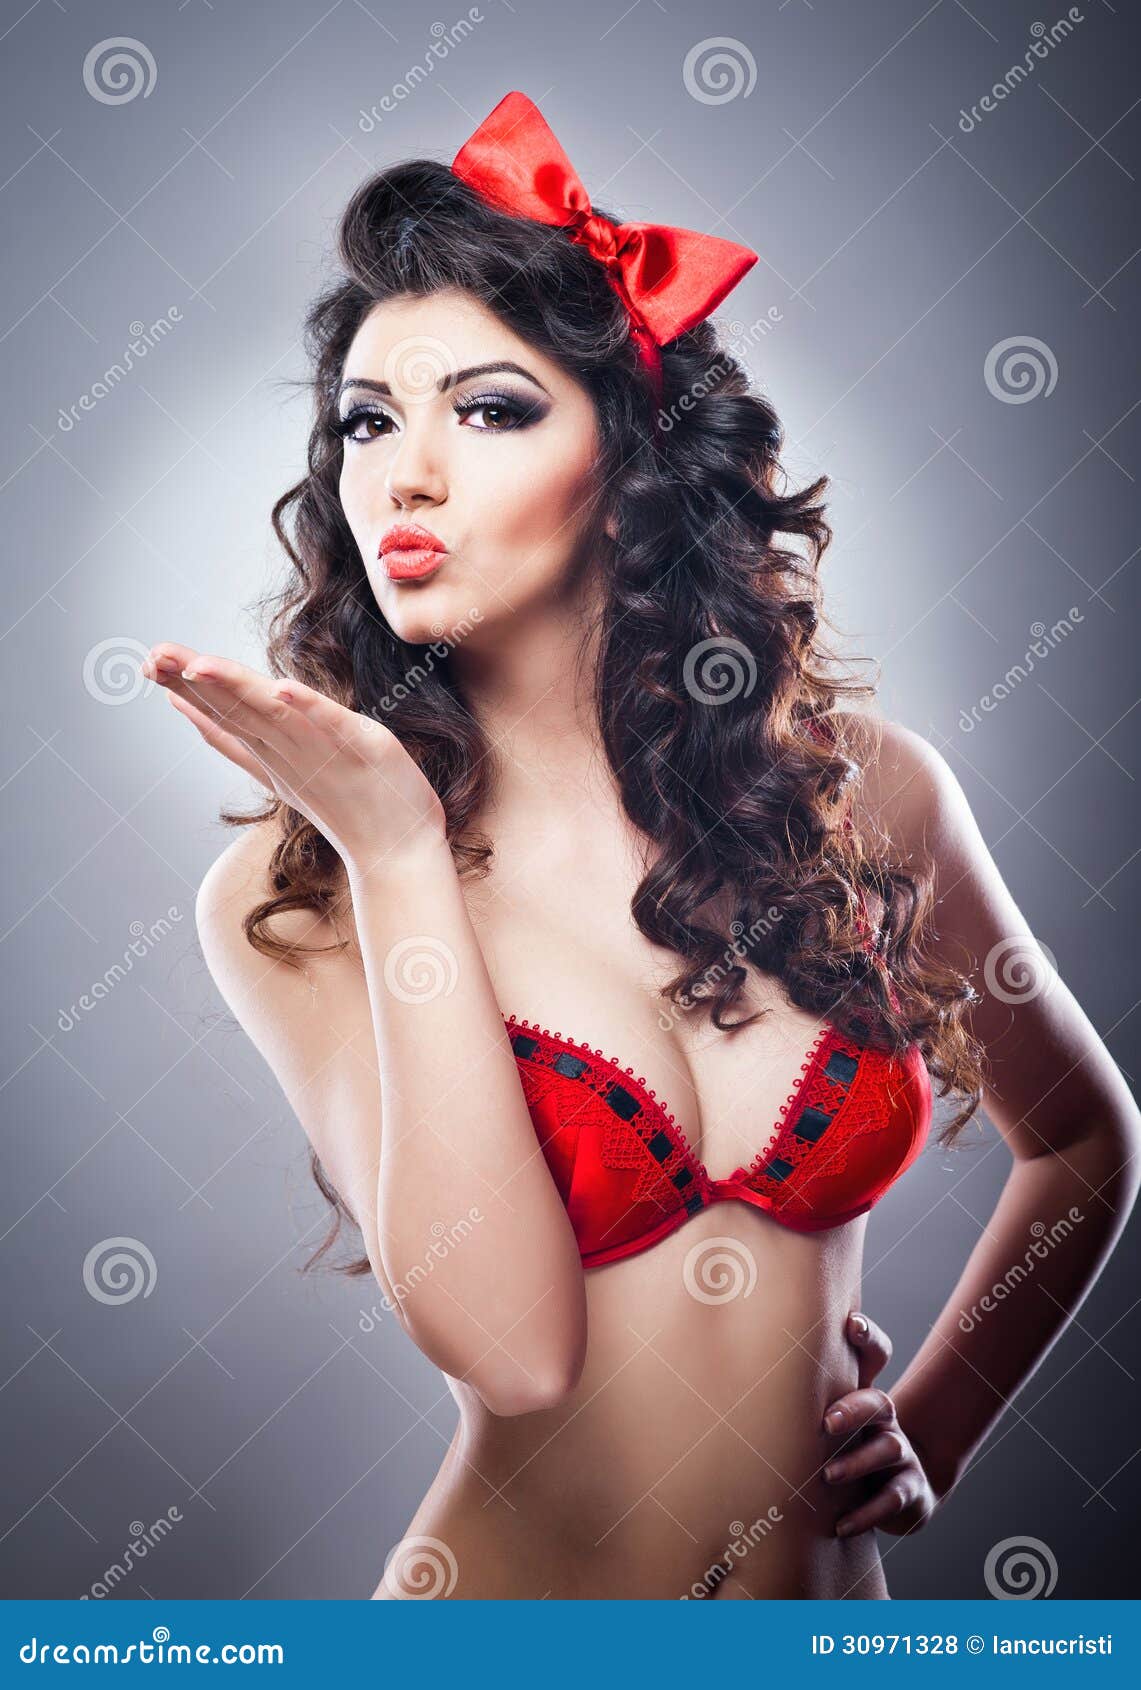 Attractive Girl with a Red Bow on Her Head and Red Bra Send a Kiss